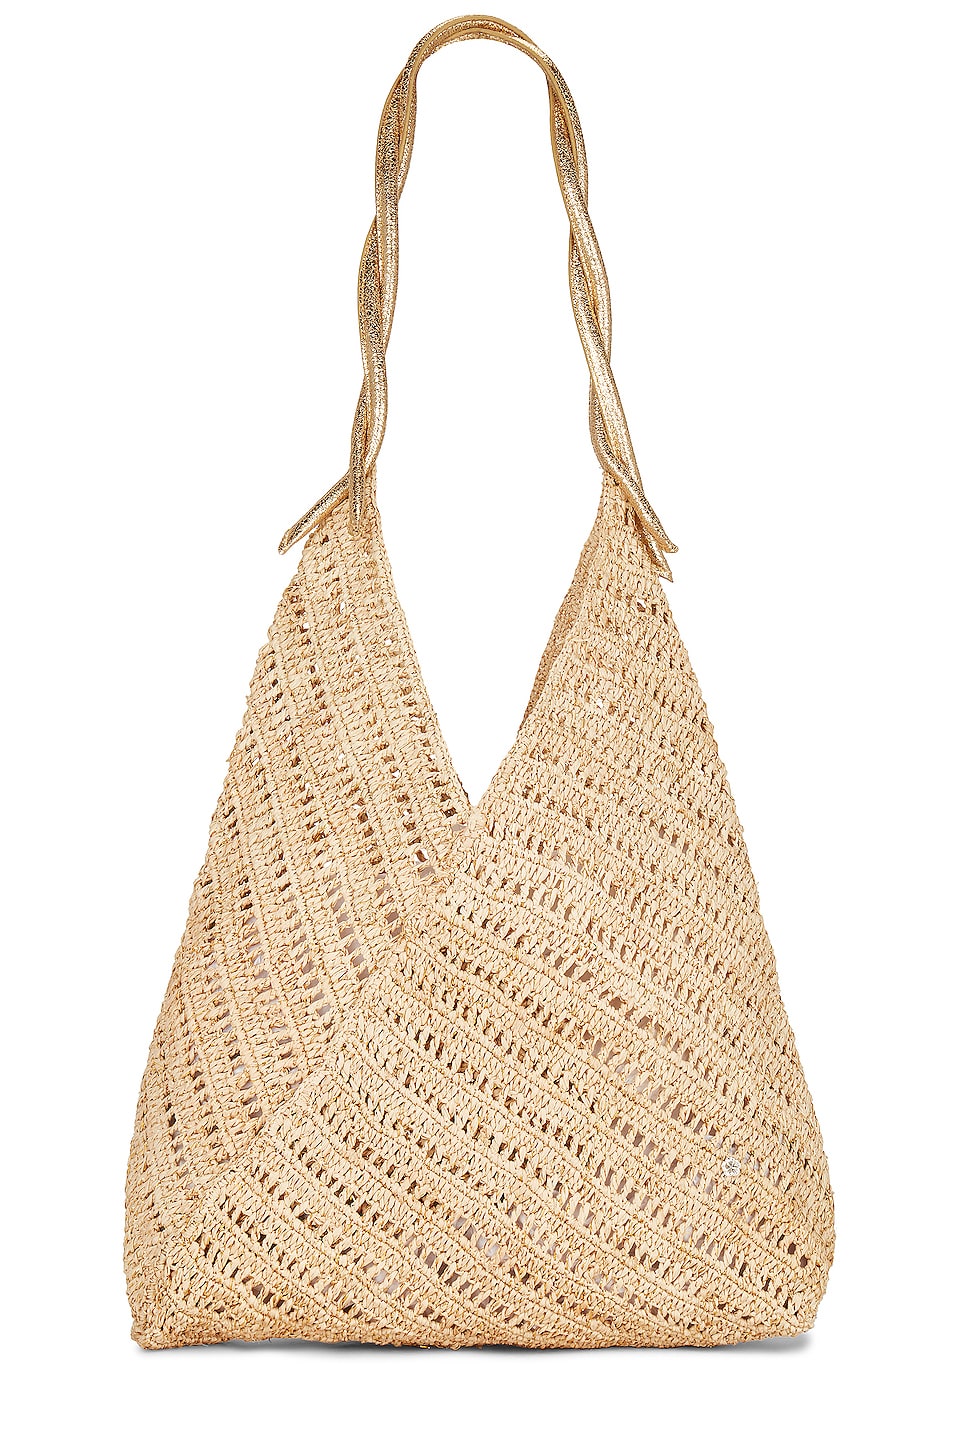 HealthdesignShops - One of the bags that started my  new-found-must-have-a-raffia-bag obsession is this